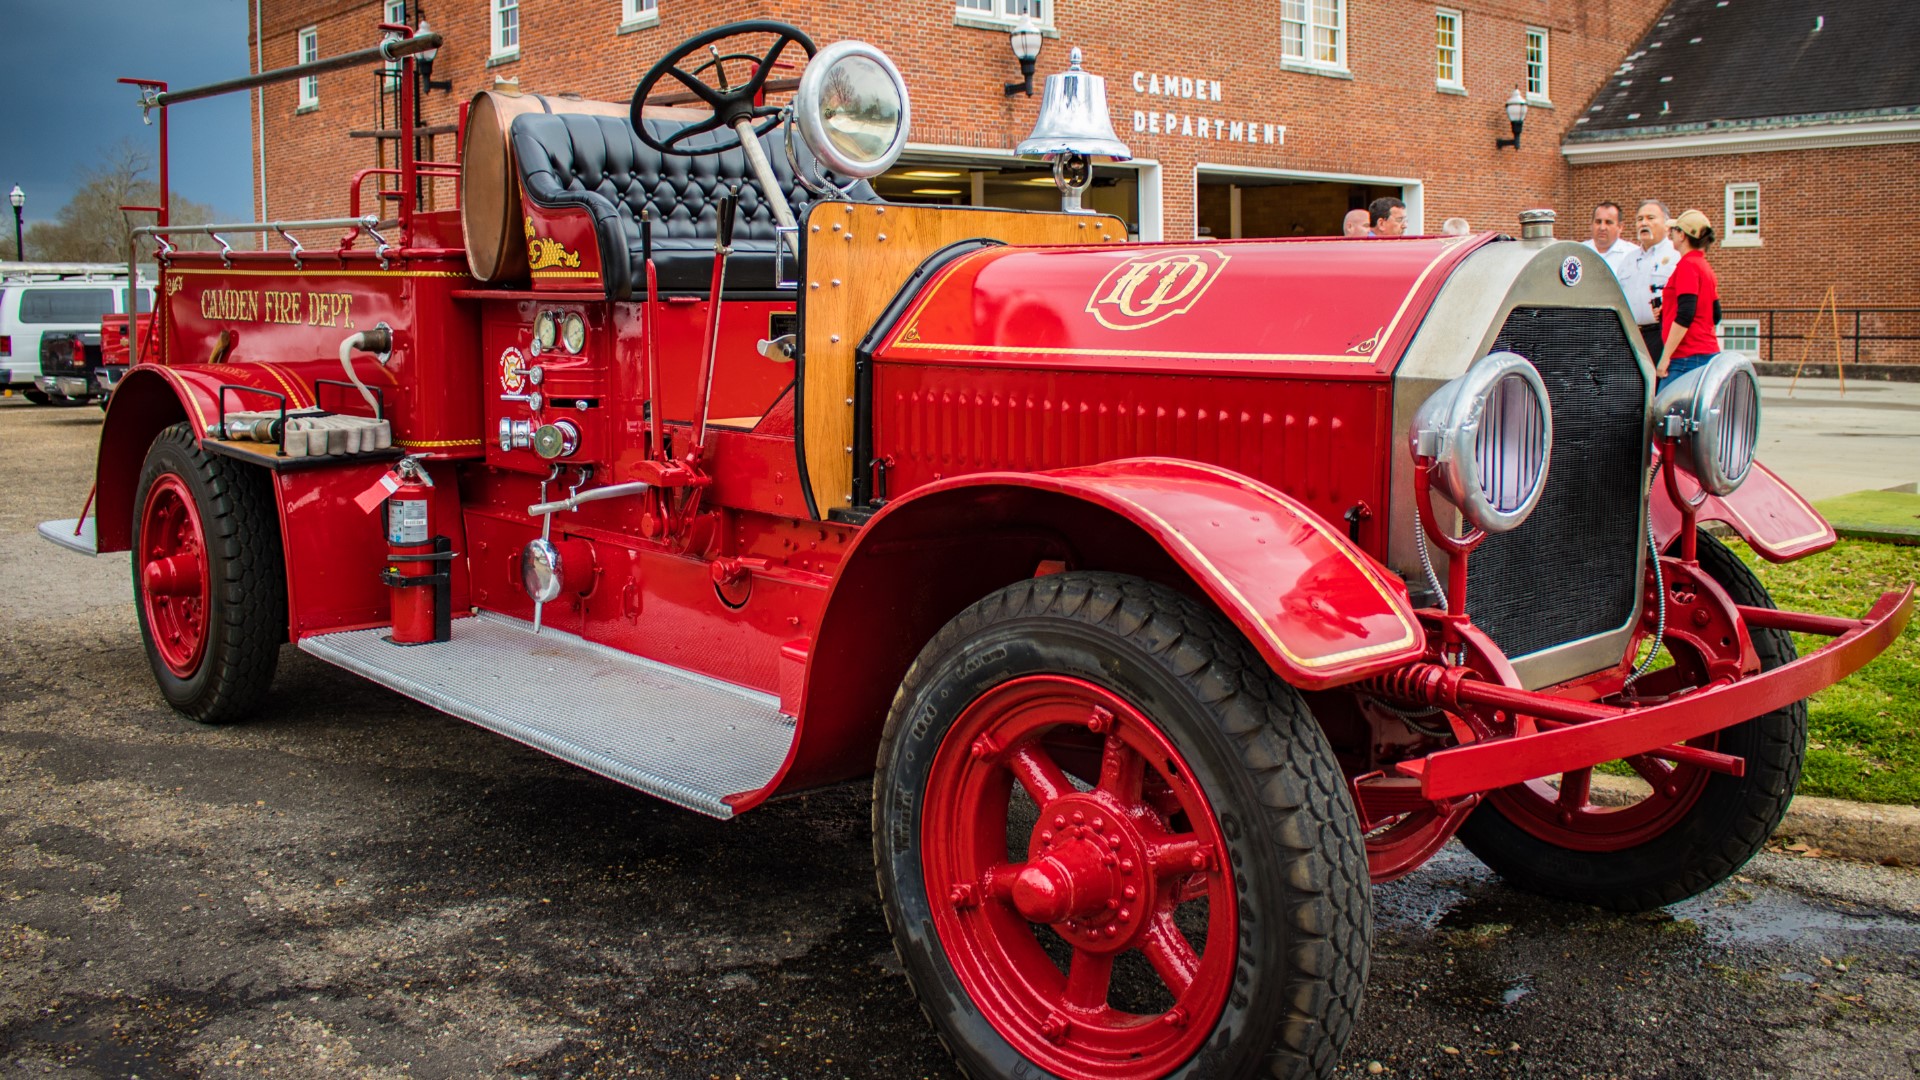 Ever wonder why fire drills are held monthly in schools? Nearly 100 years ago, a local fire truck responded to a deadly fire which provoked the entire country to push for change.